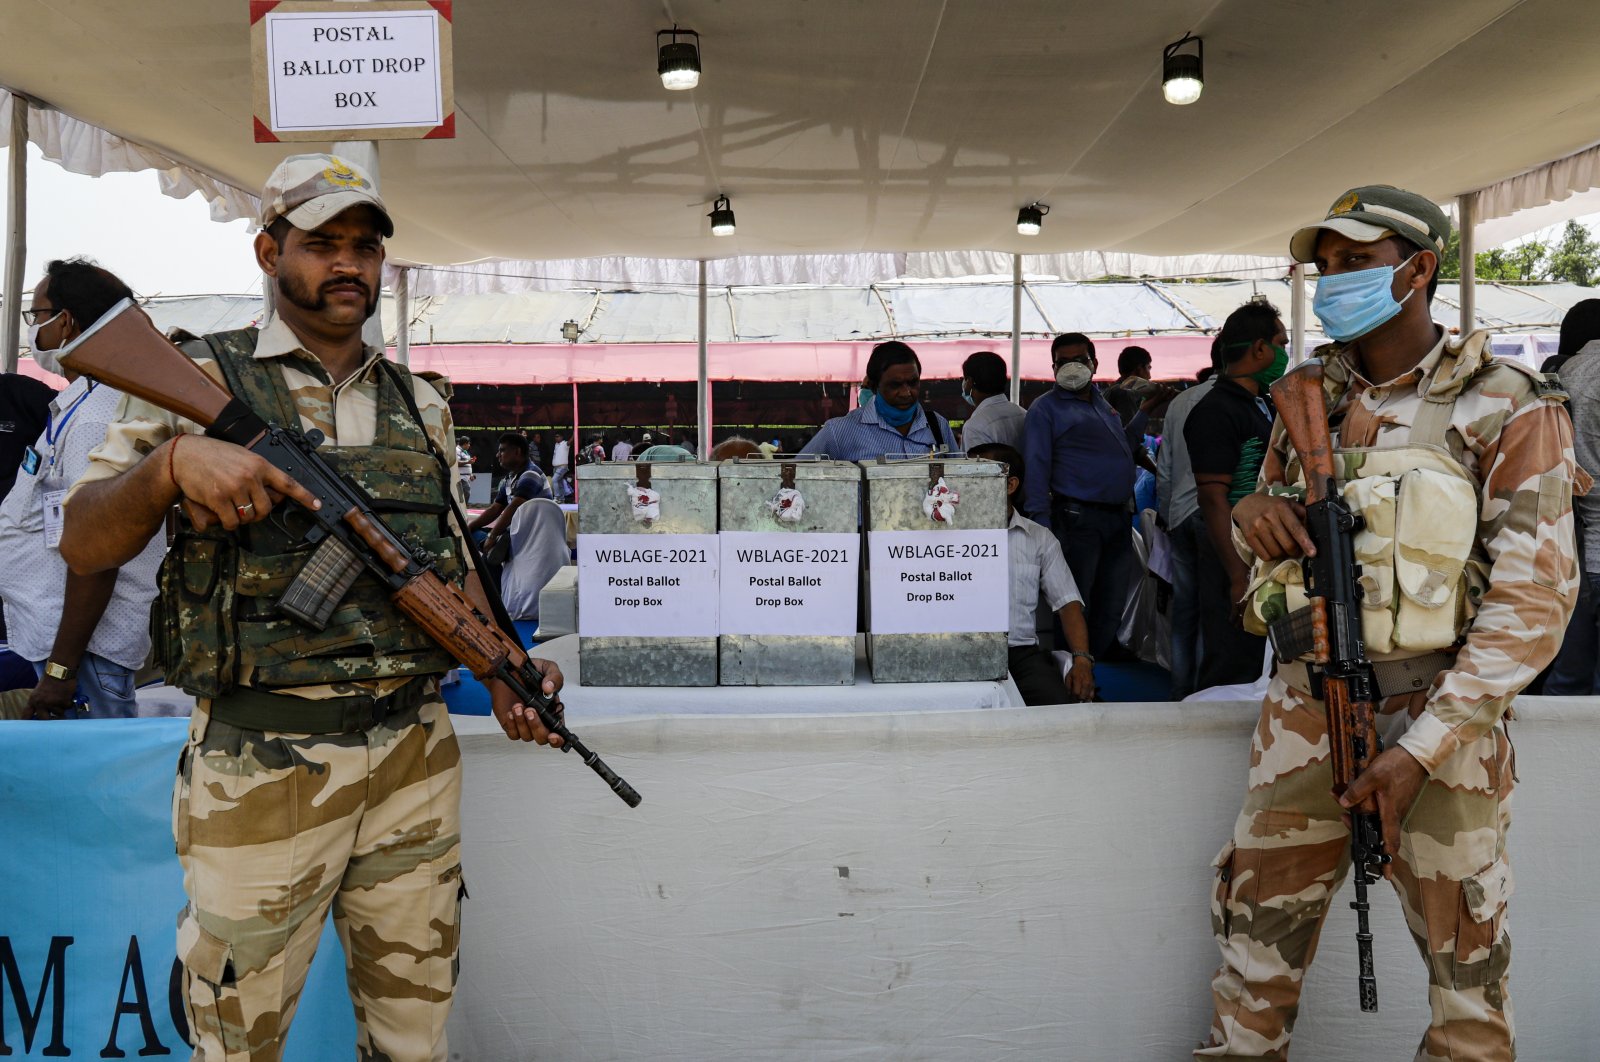 Central Reserve Police Force soldiers stand guard near postal ballot boxes placed for working polling officers ahead of the second phase of West Bengal state elections in Haldia, India, March 31, 2021. (AP Photo)